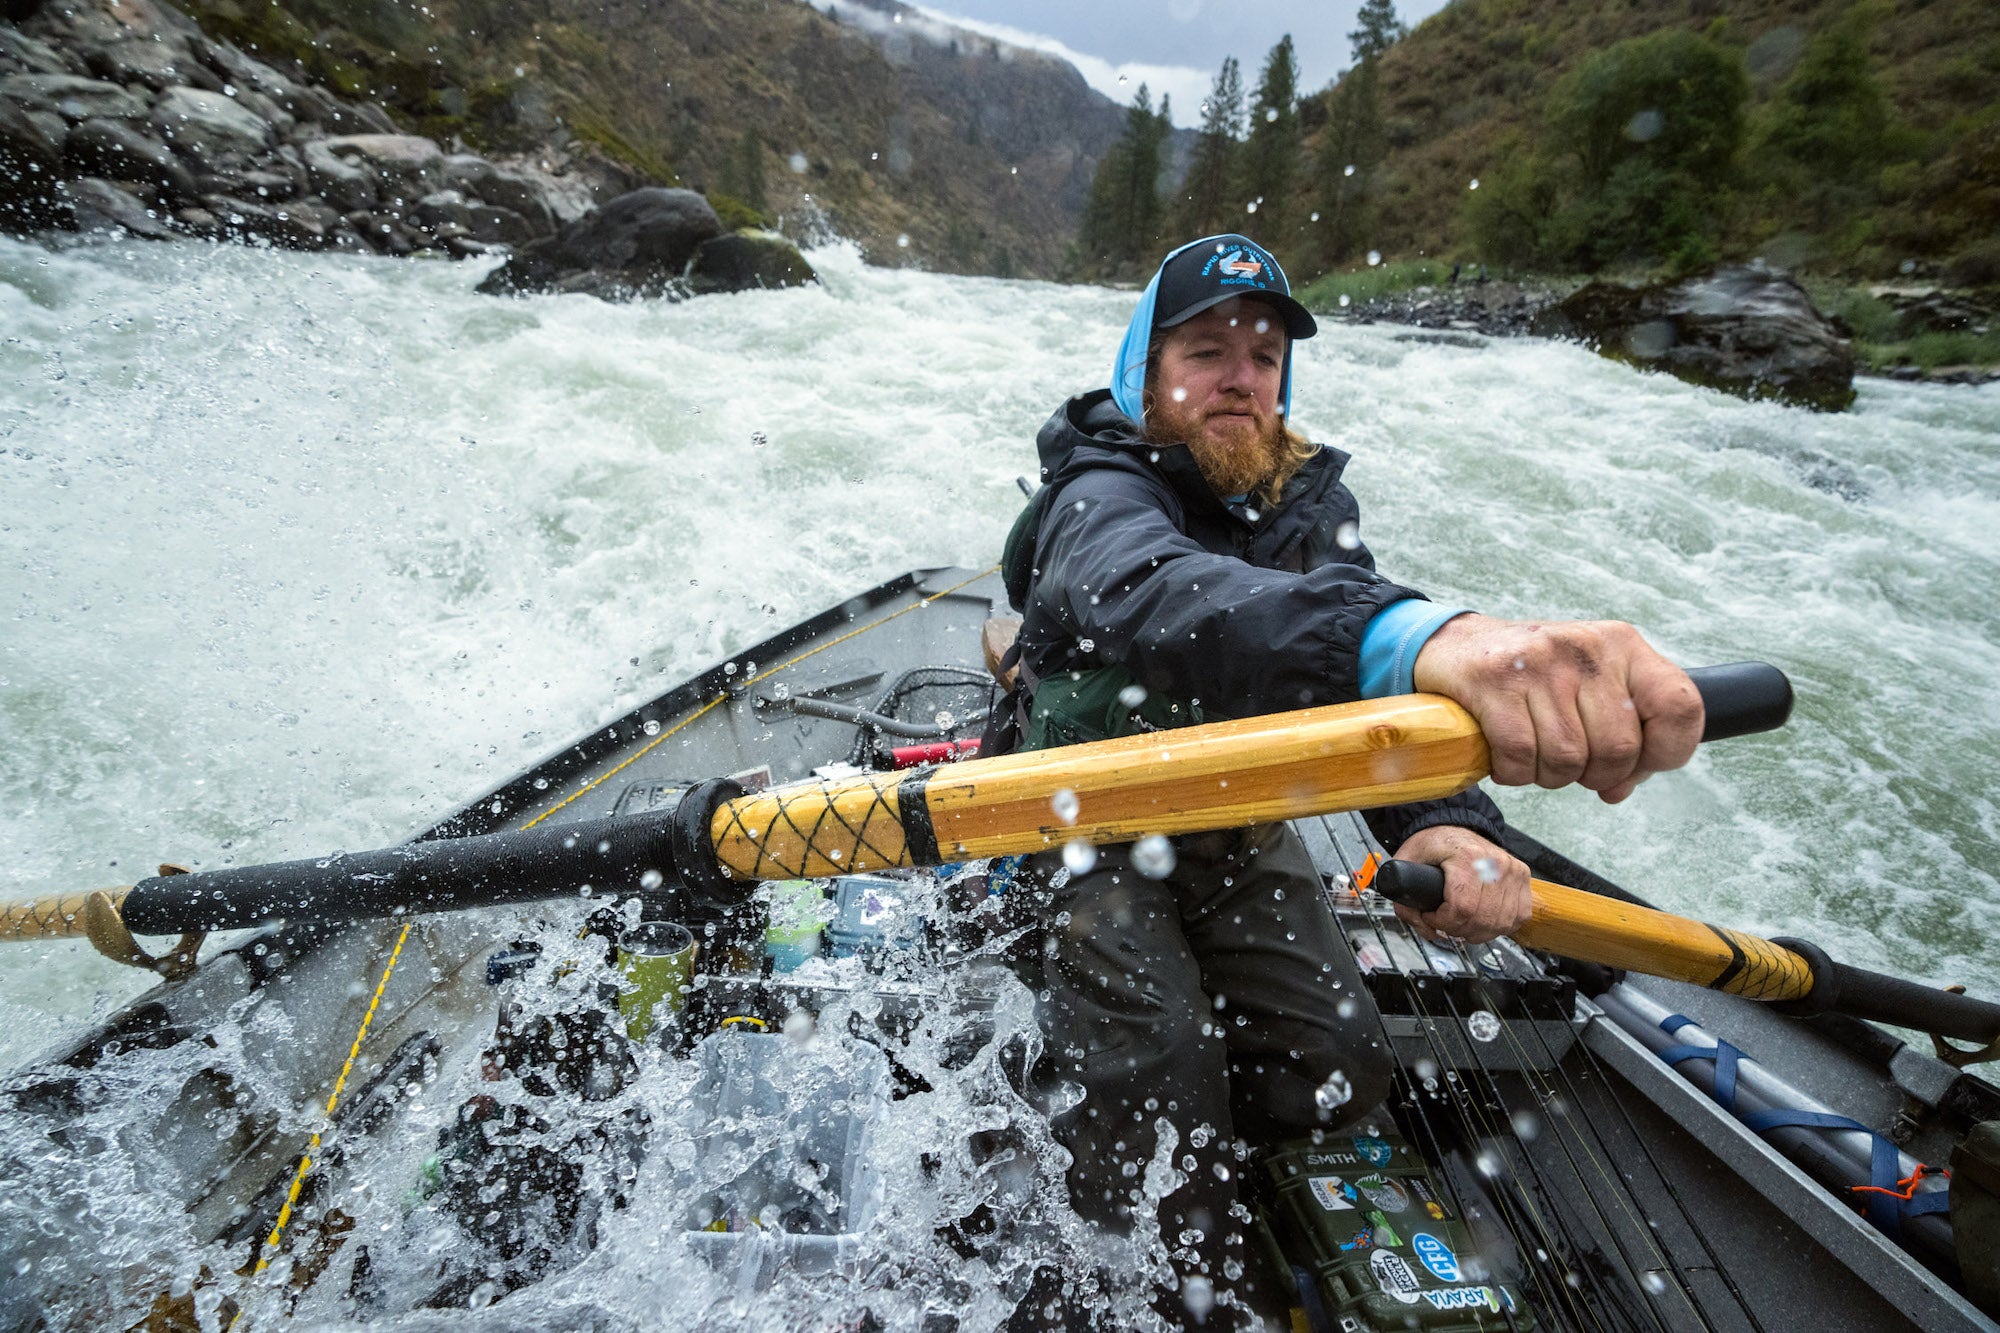 Ben Brault rows through "Snow Hole" on the lower Salmon.